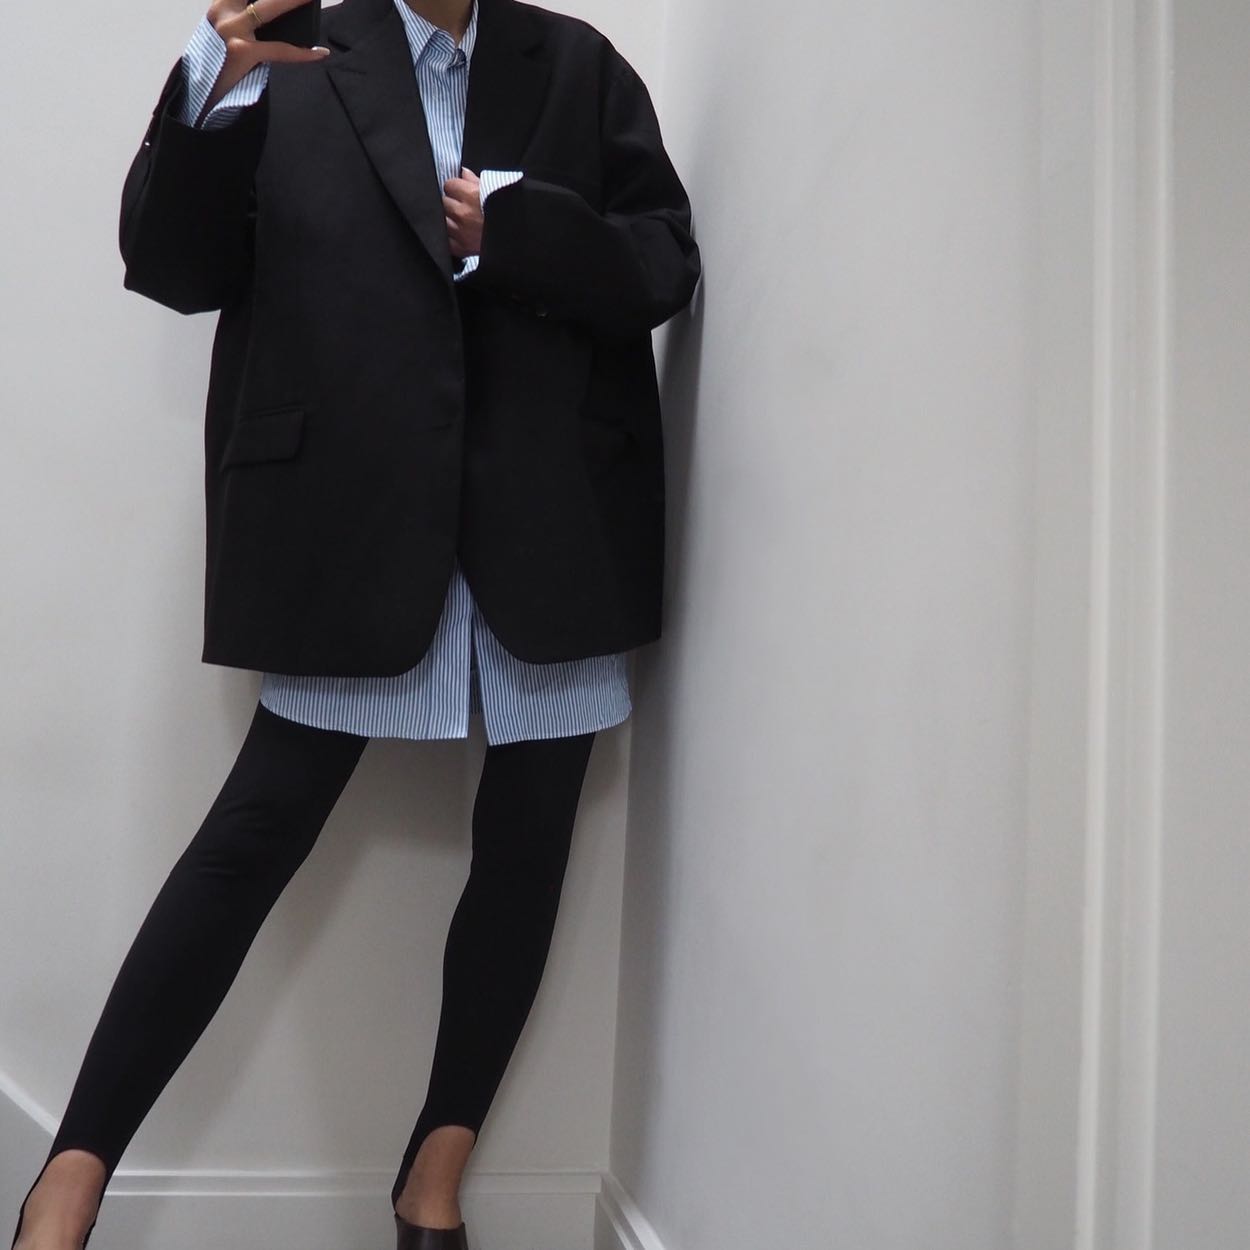 Blazer and legging outfits: @honeybelleworld wears an oversized blazer with a shirt and stirrup leggings